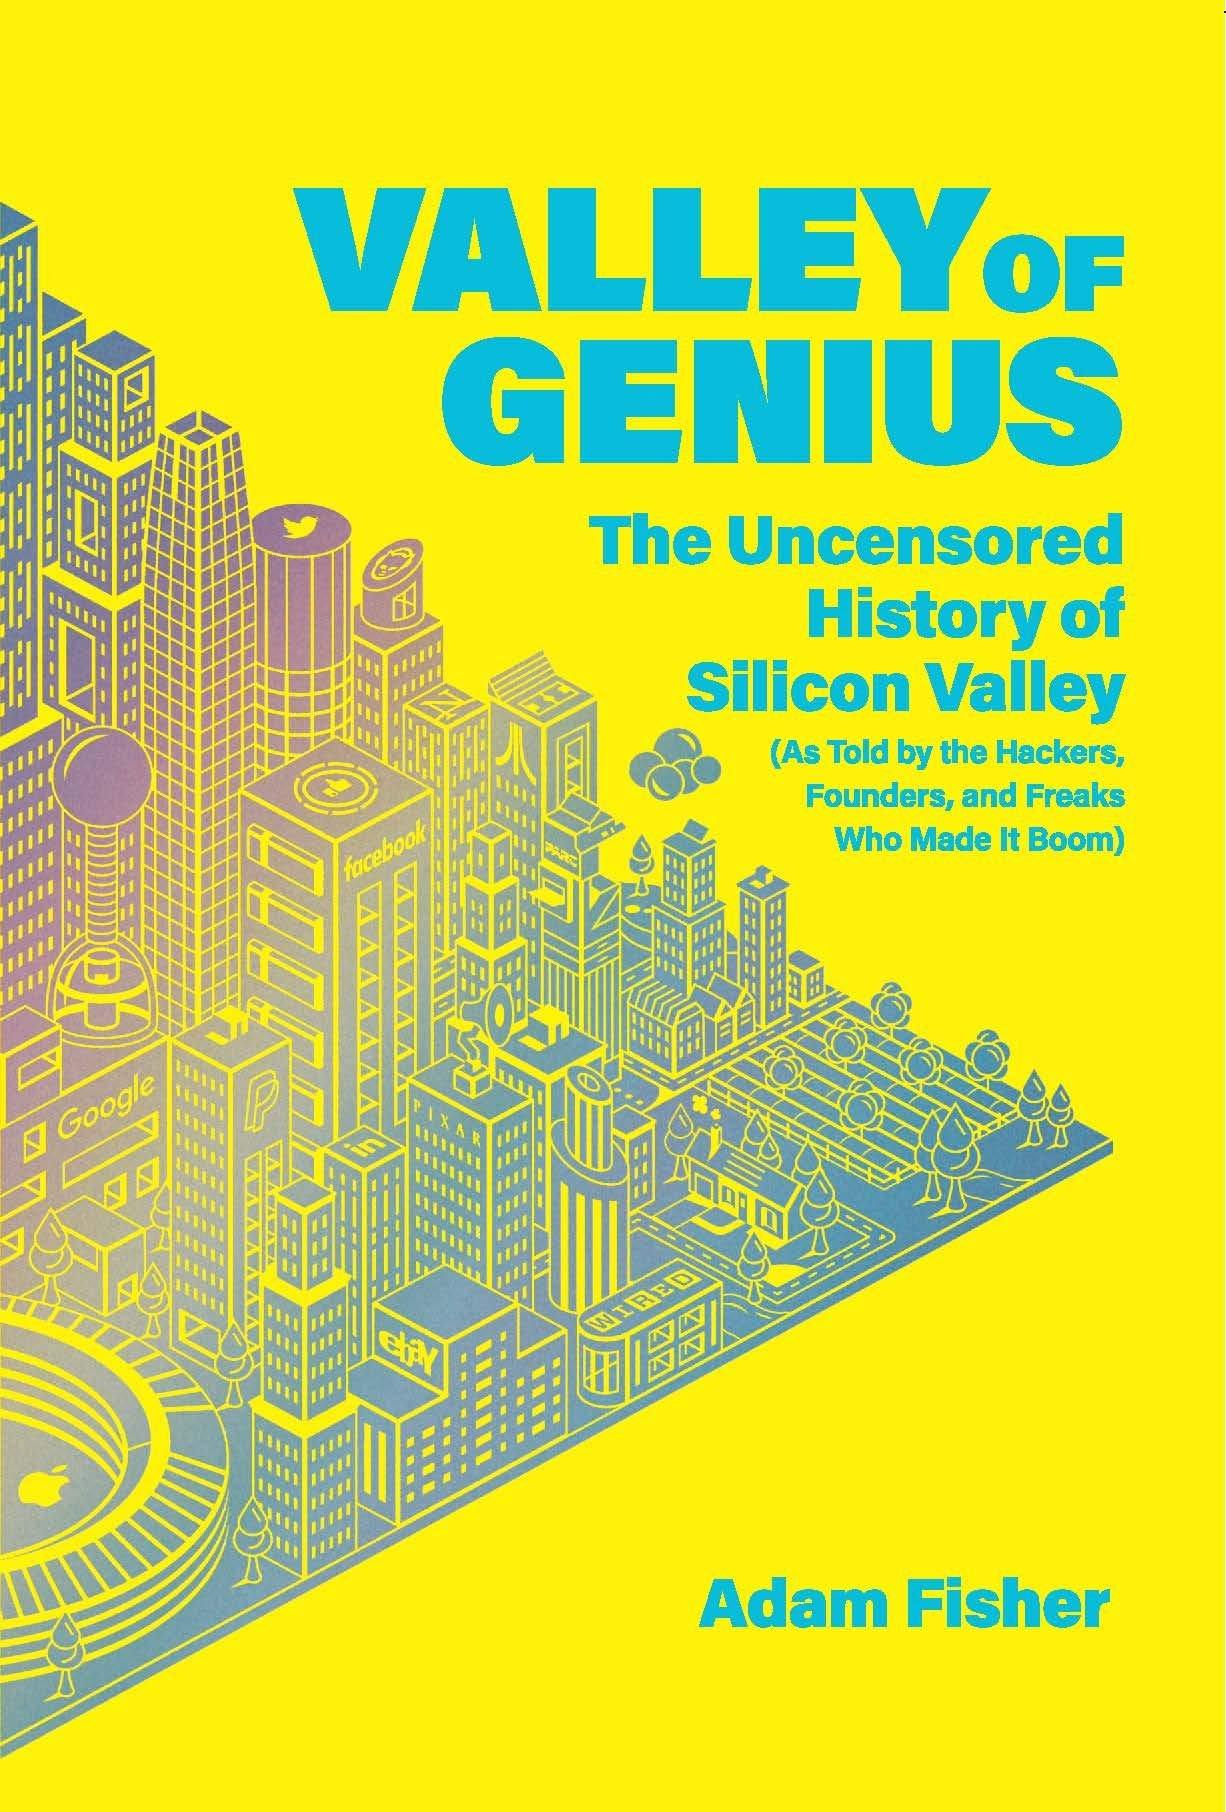 Valley of Genius: The Uncensored History of Silicon Valley (Adam Fisher)